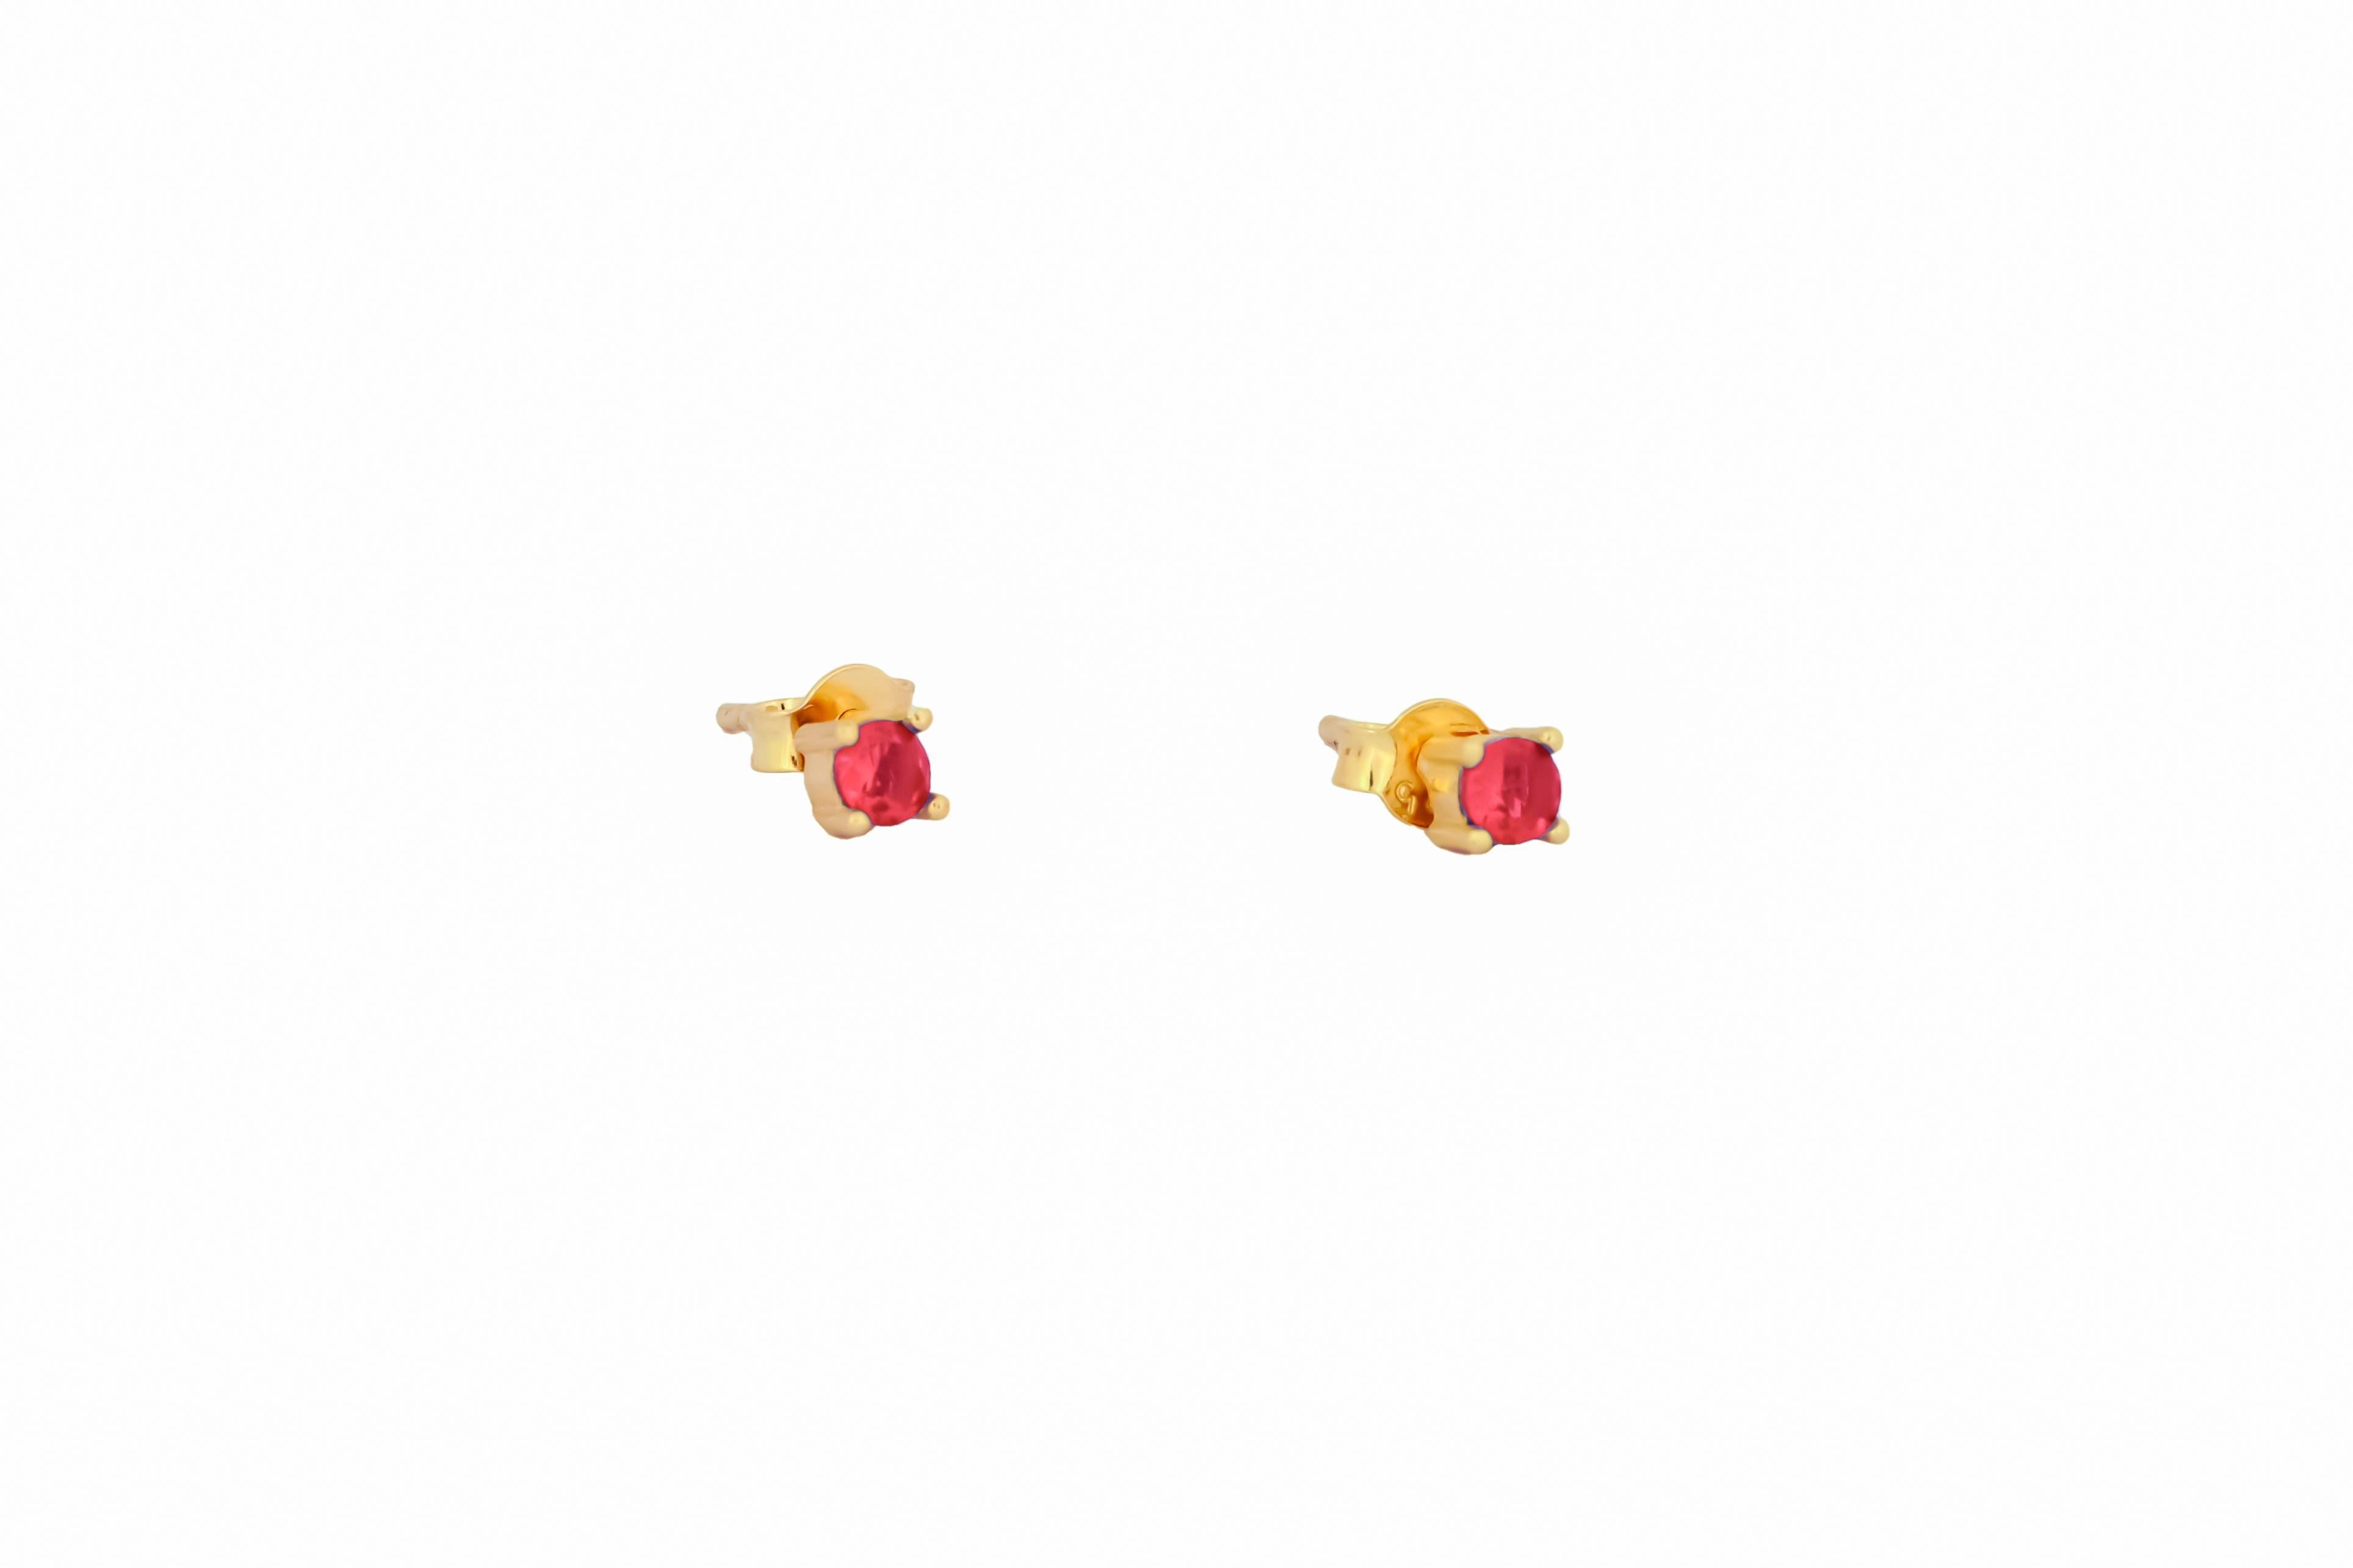 14 ct Gold Lab Ruby Stud Earrings.  
3 mm ruby earrings. Red gemstone earrings. Small delicate gold earrings studs. Four prong studs. Minimalist sapphire earrings.

Metal: 14k solid gold
Earrings goes with gold clasps

Gemstones:
2 red color, round